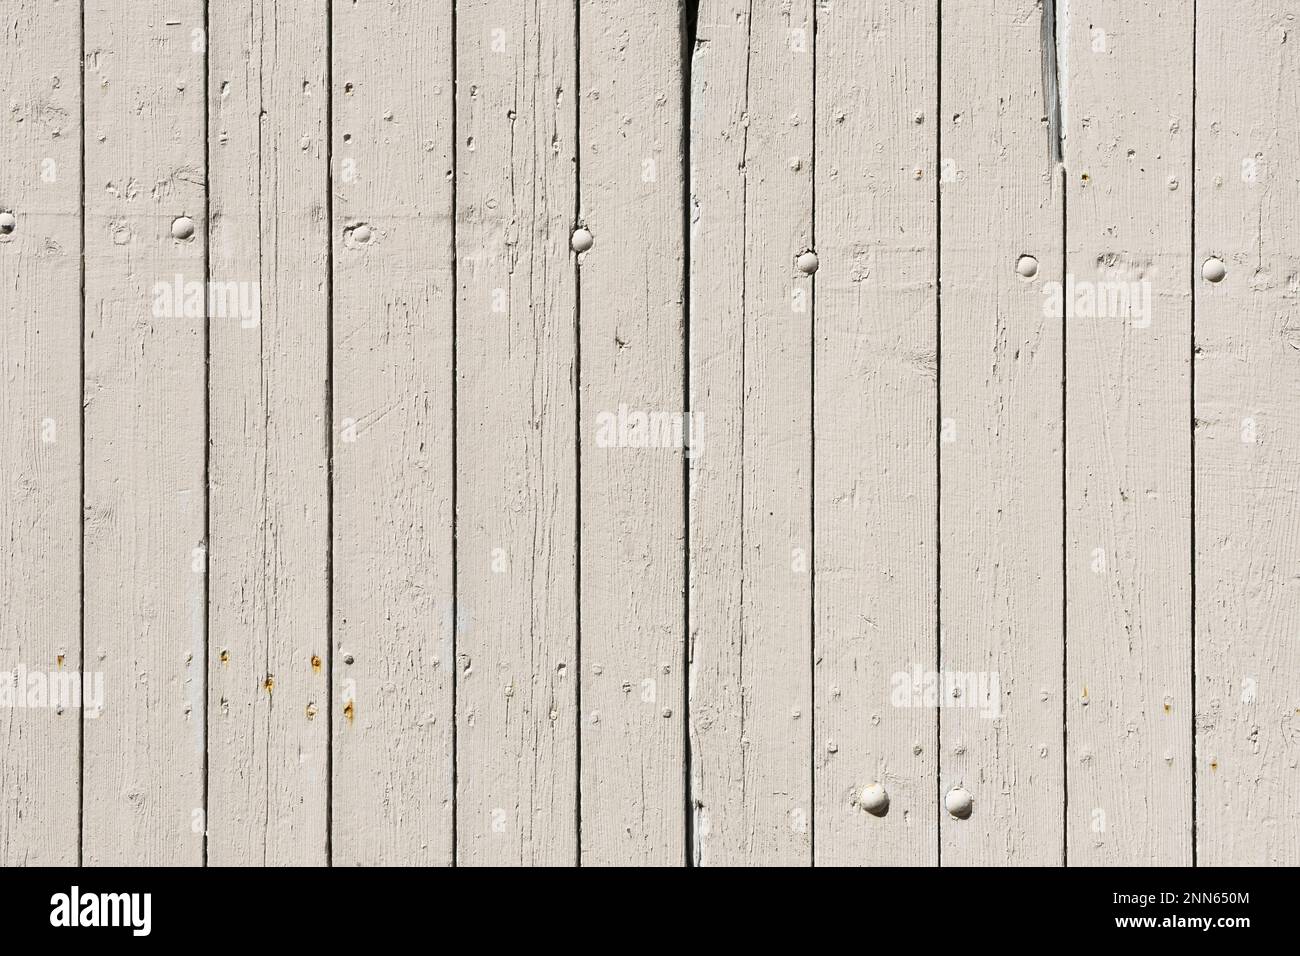 Rustic wood planks with lots of texture in light tones. Stock Photo